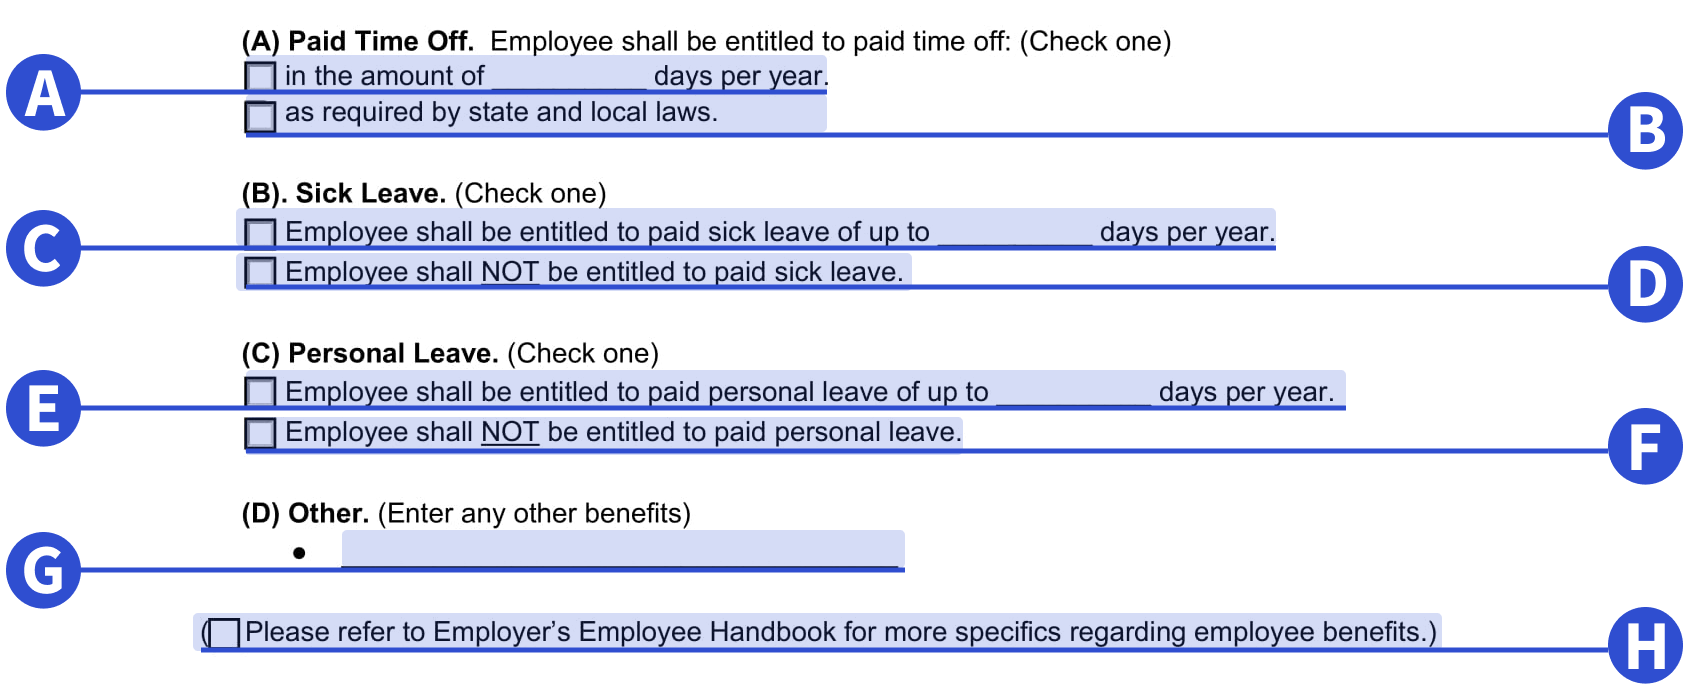 Where to detail time off information in our employment contract template.